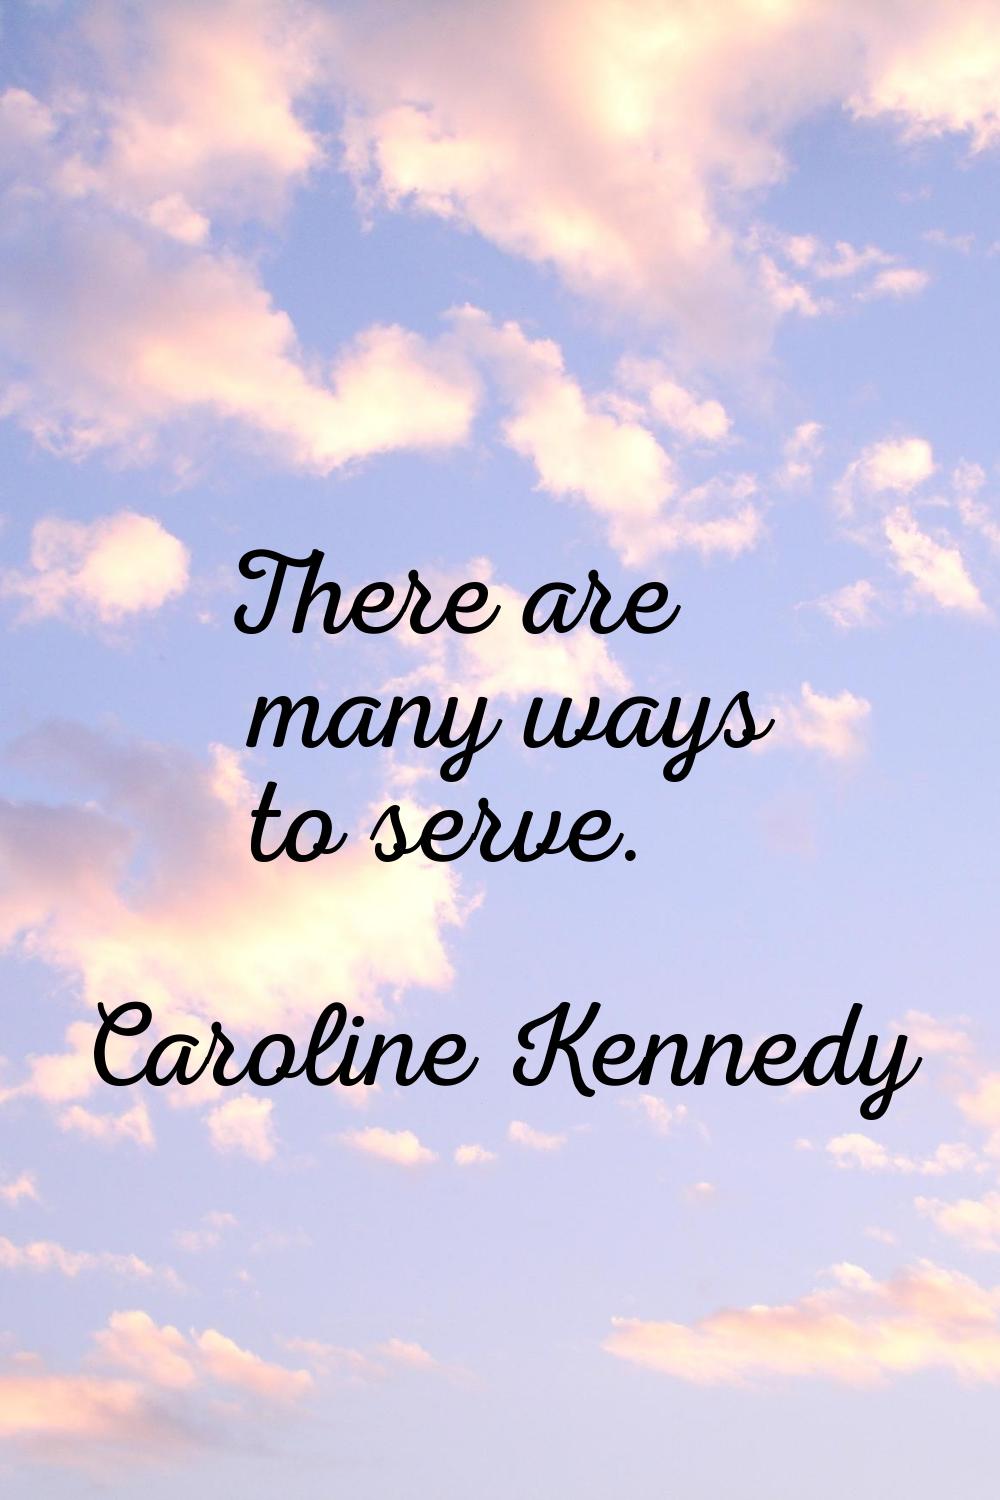 There are many ways to serve.